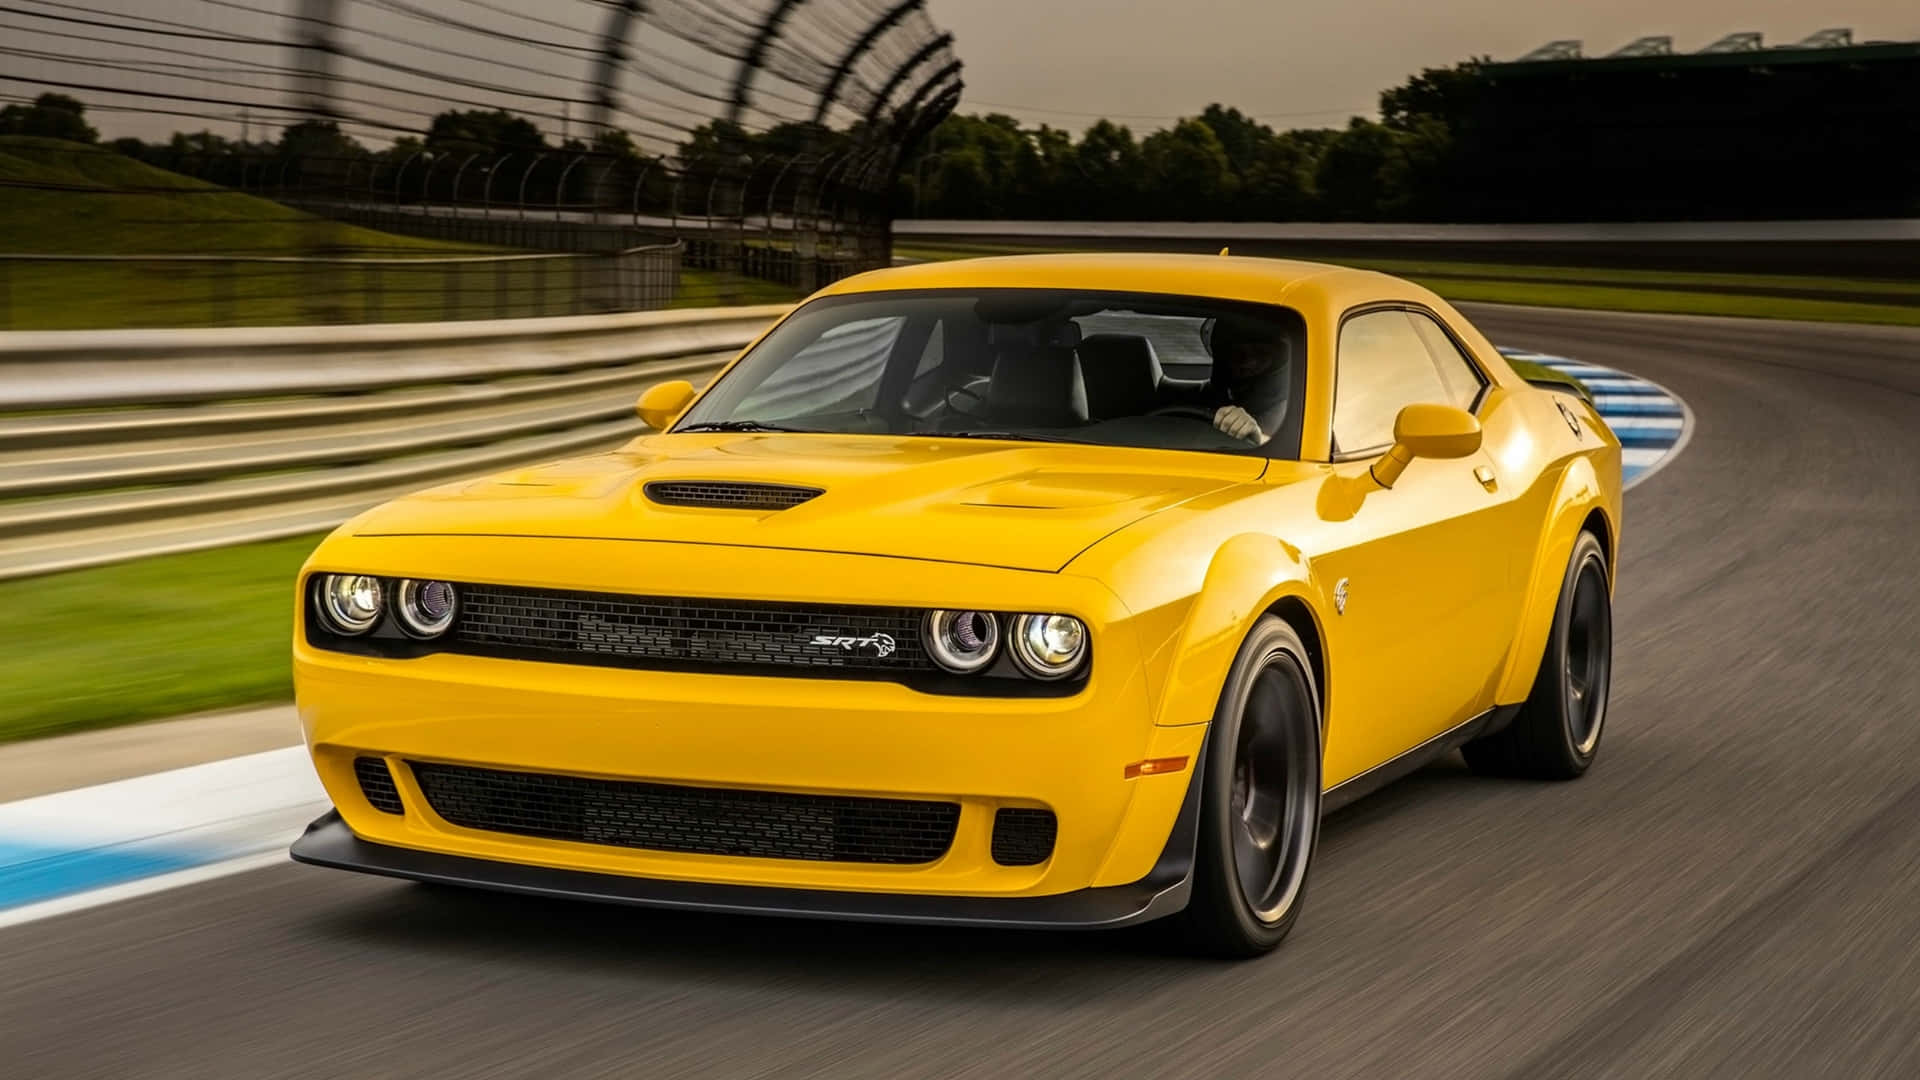 The Yellow Dodge Challenger Is Driving On A Race Track Background